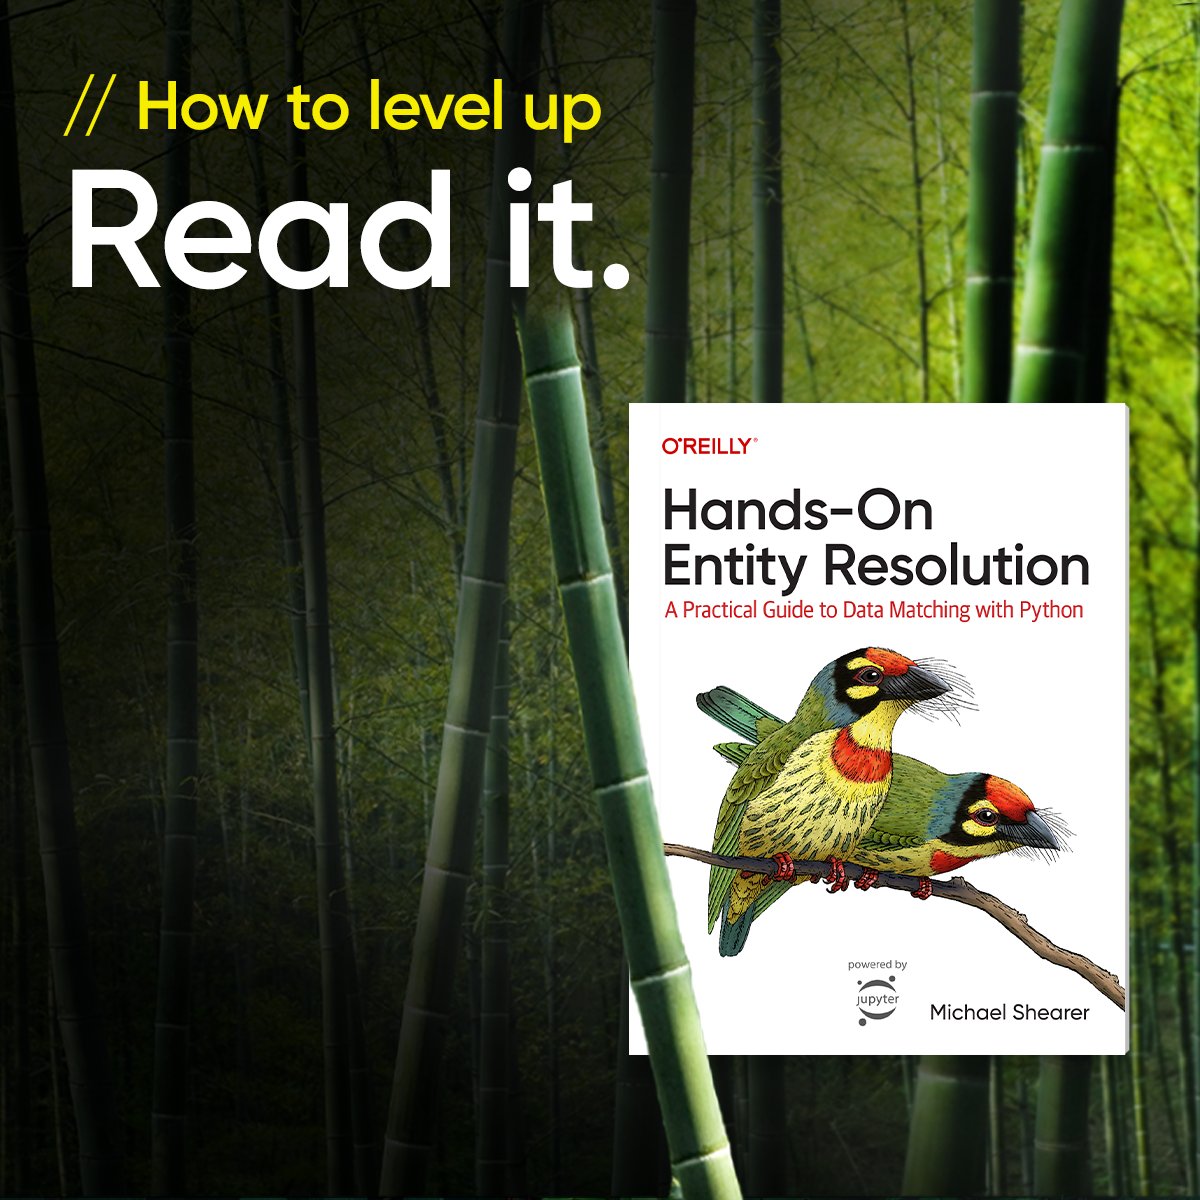 Author @mwshear shows you how to scale up your data matching processes and improve the accuracy of your reconciliations. Using real-world data examples, this book helps you gain practical understanding to accelerate the delivery of real business value. oreil.ly/rPLcE